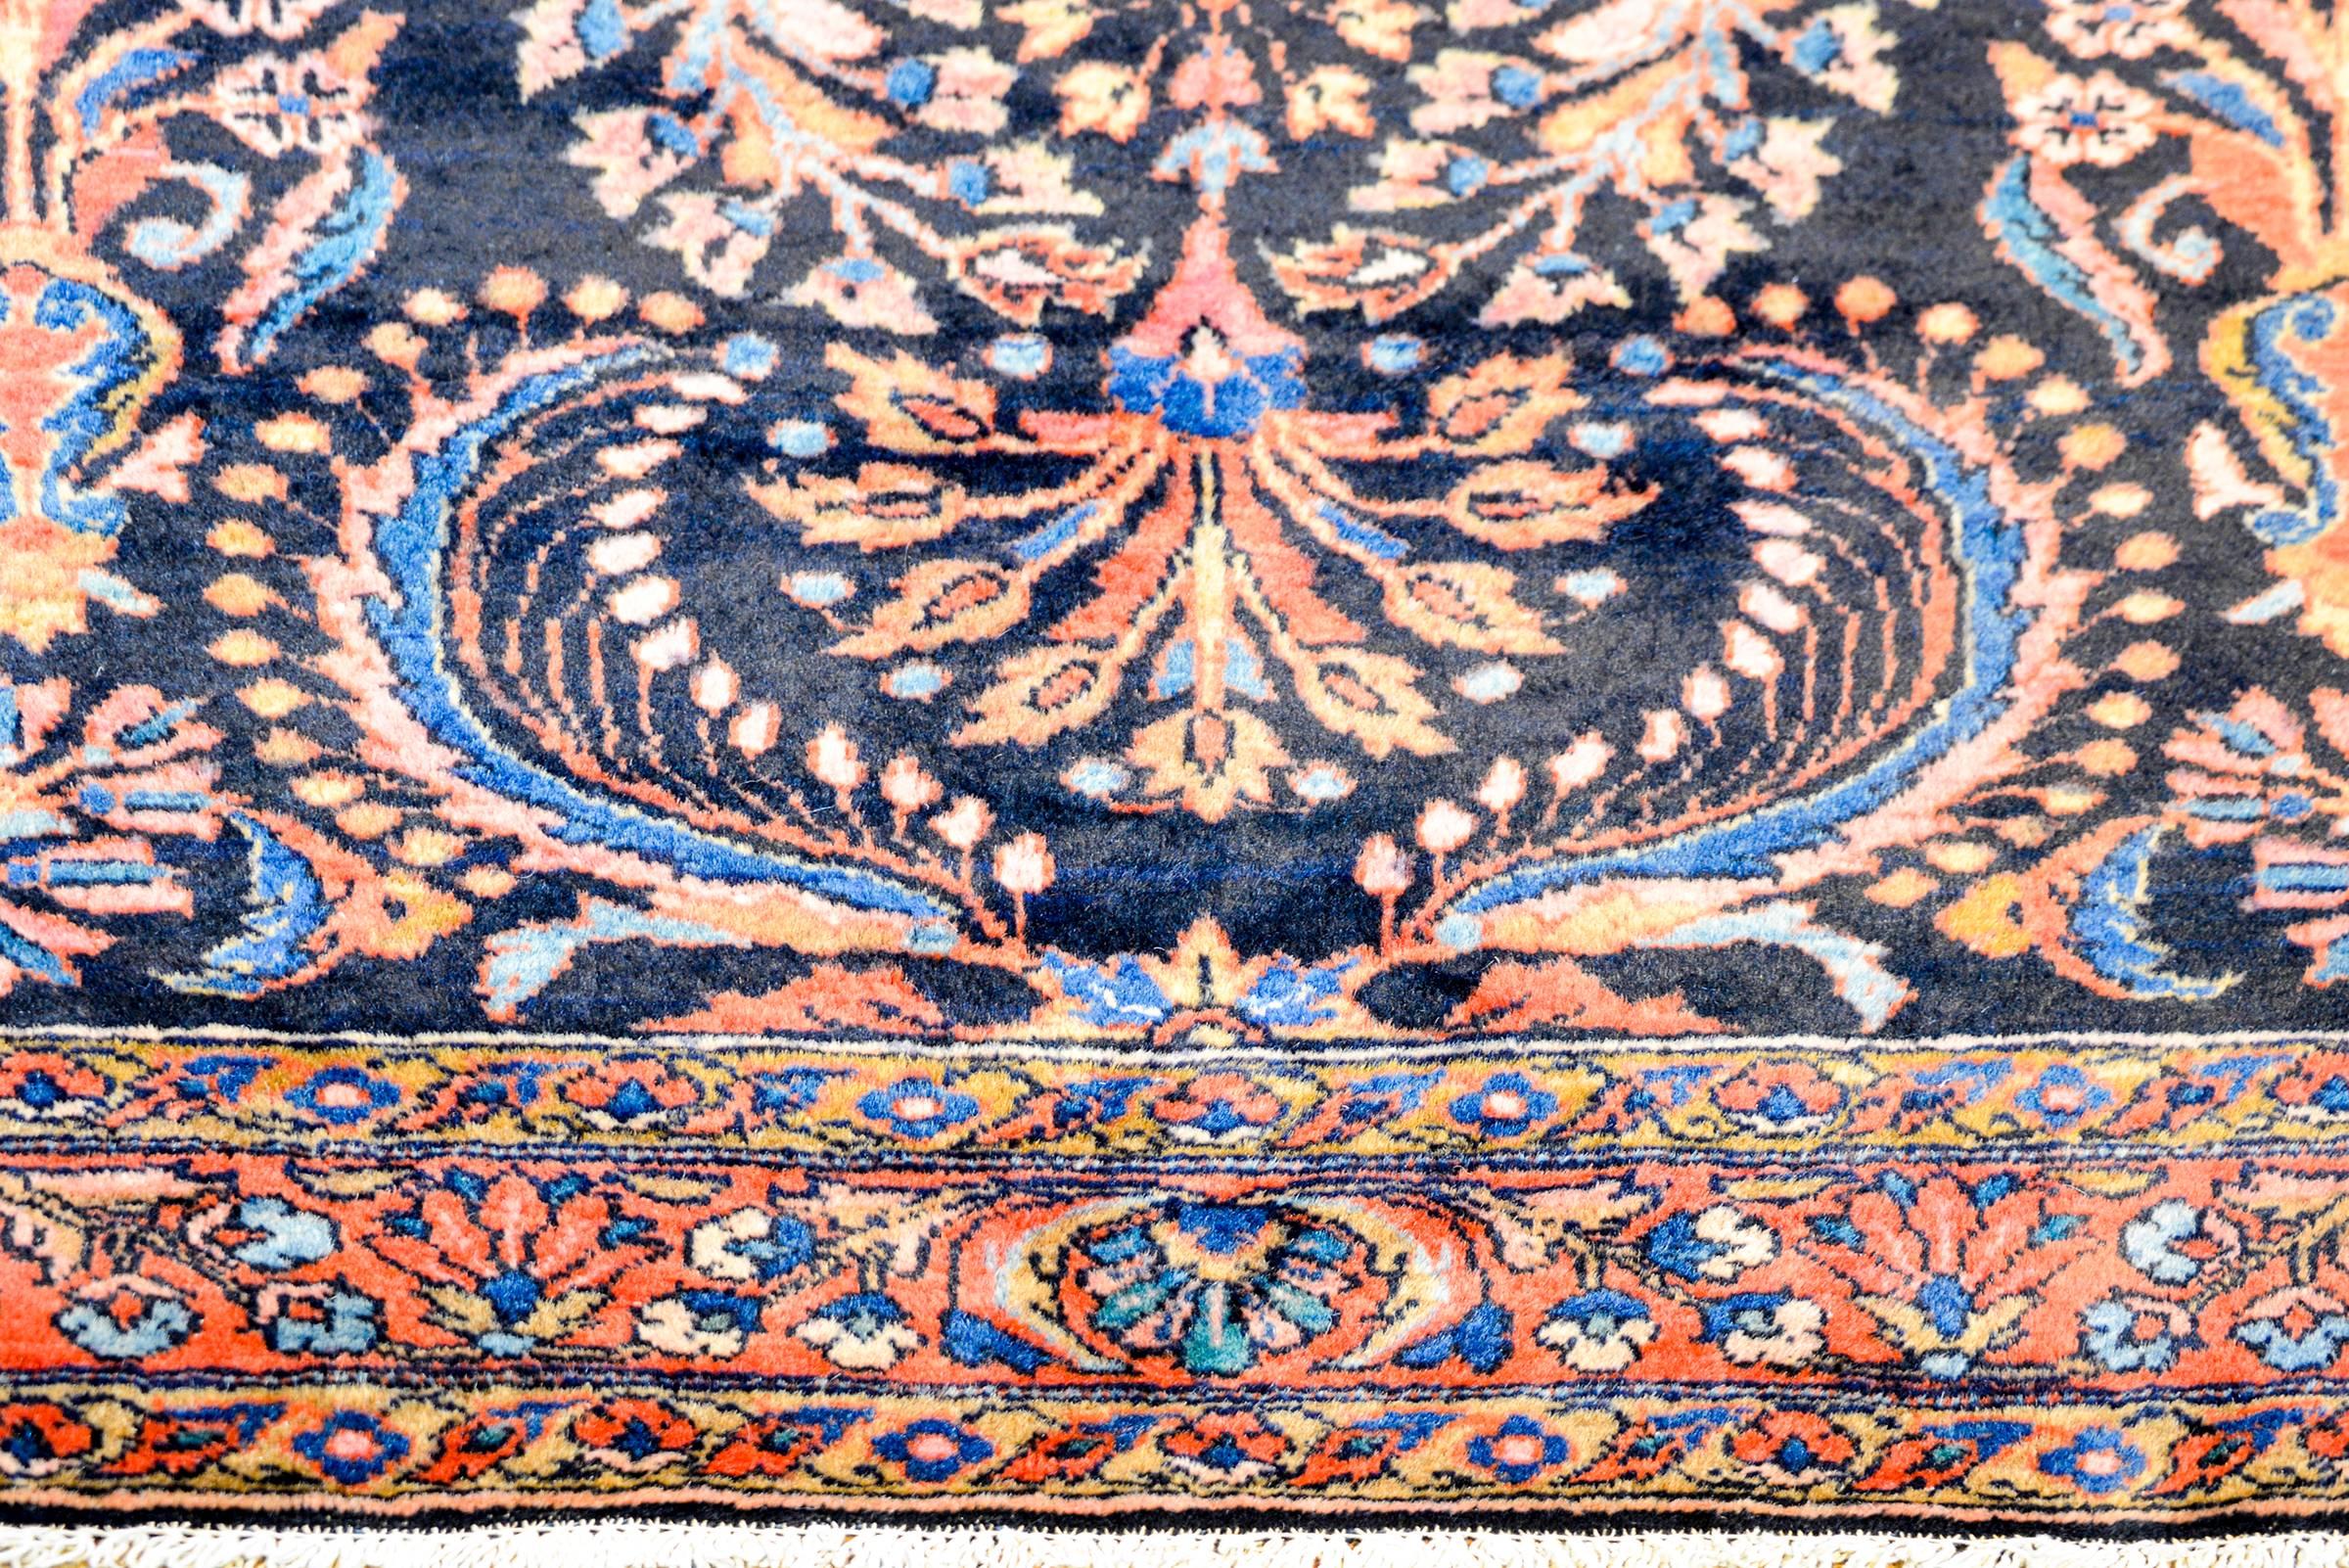 A gorgeous early 20th century Persian Lilihan rug with a dark indigo background, covered by a lacy, multicolored large-scale scrolling leaf and floral pattern woven light and dark indigo, crimson, pink, and natural undyed wool, surrounded by a wide